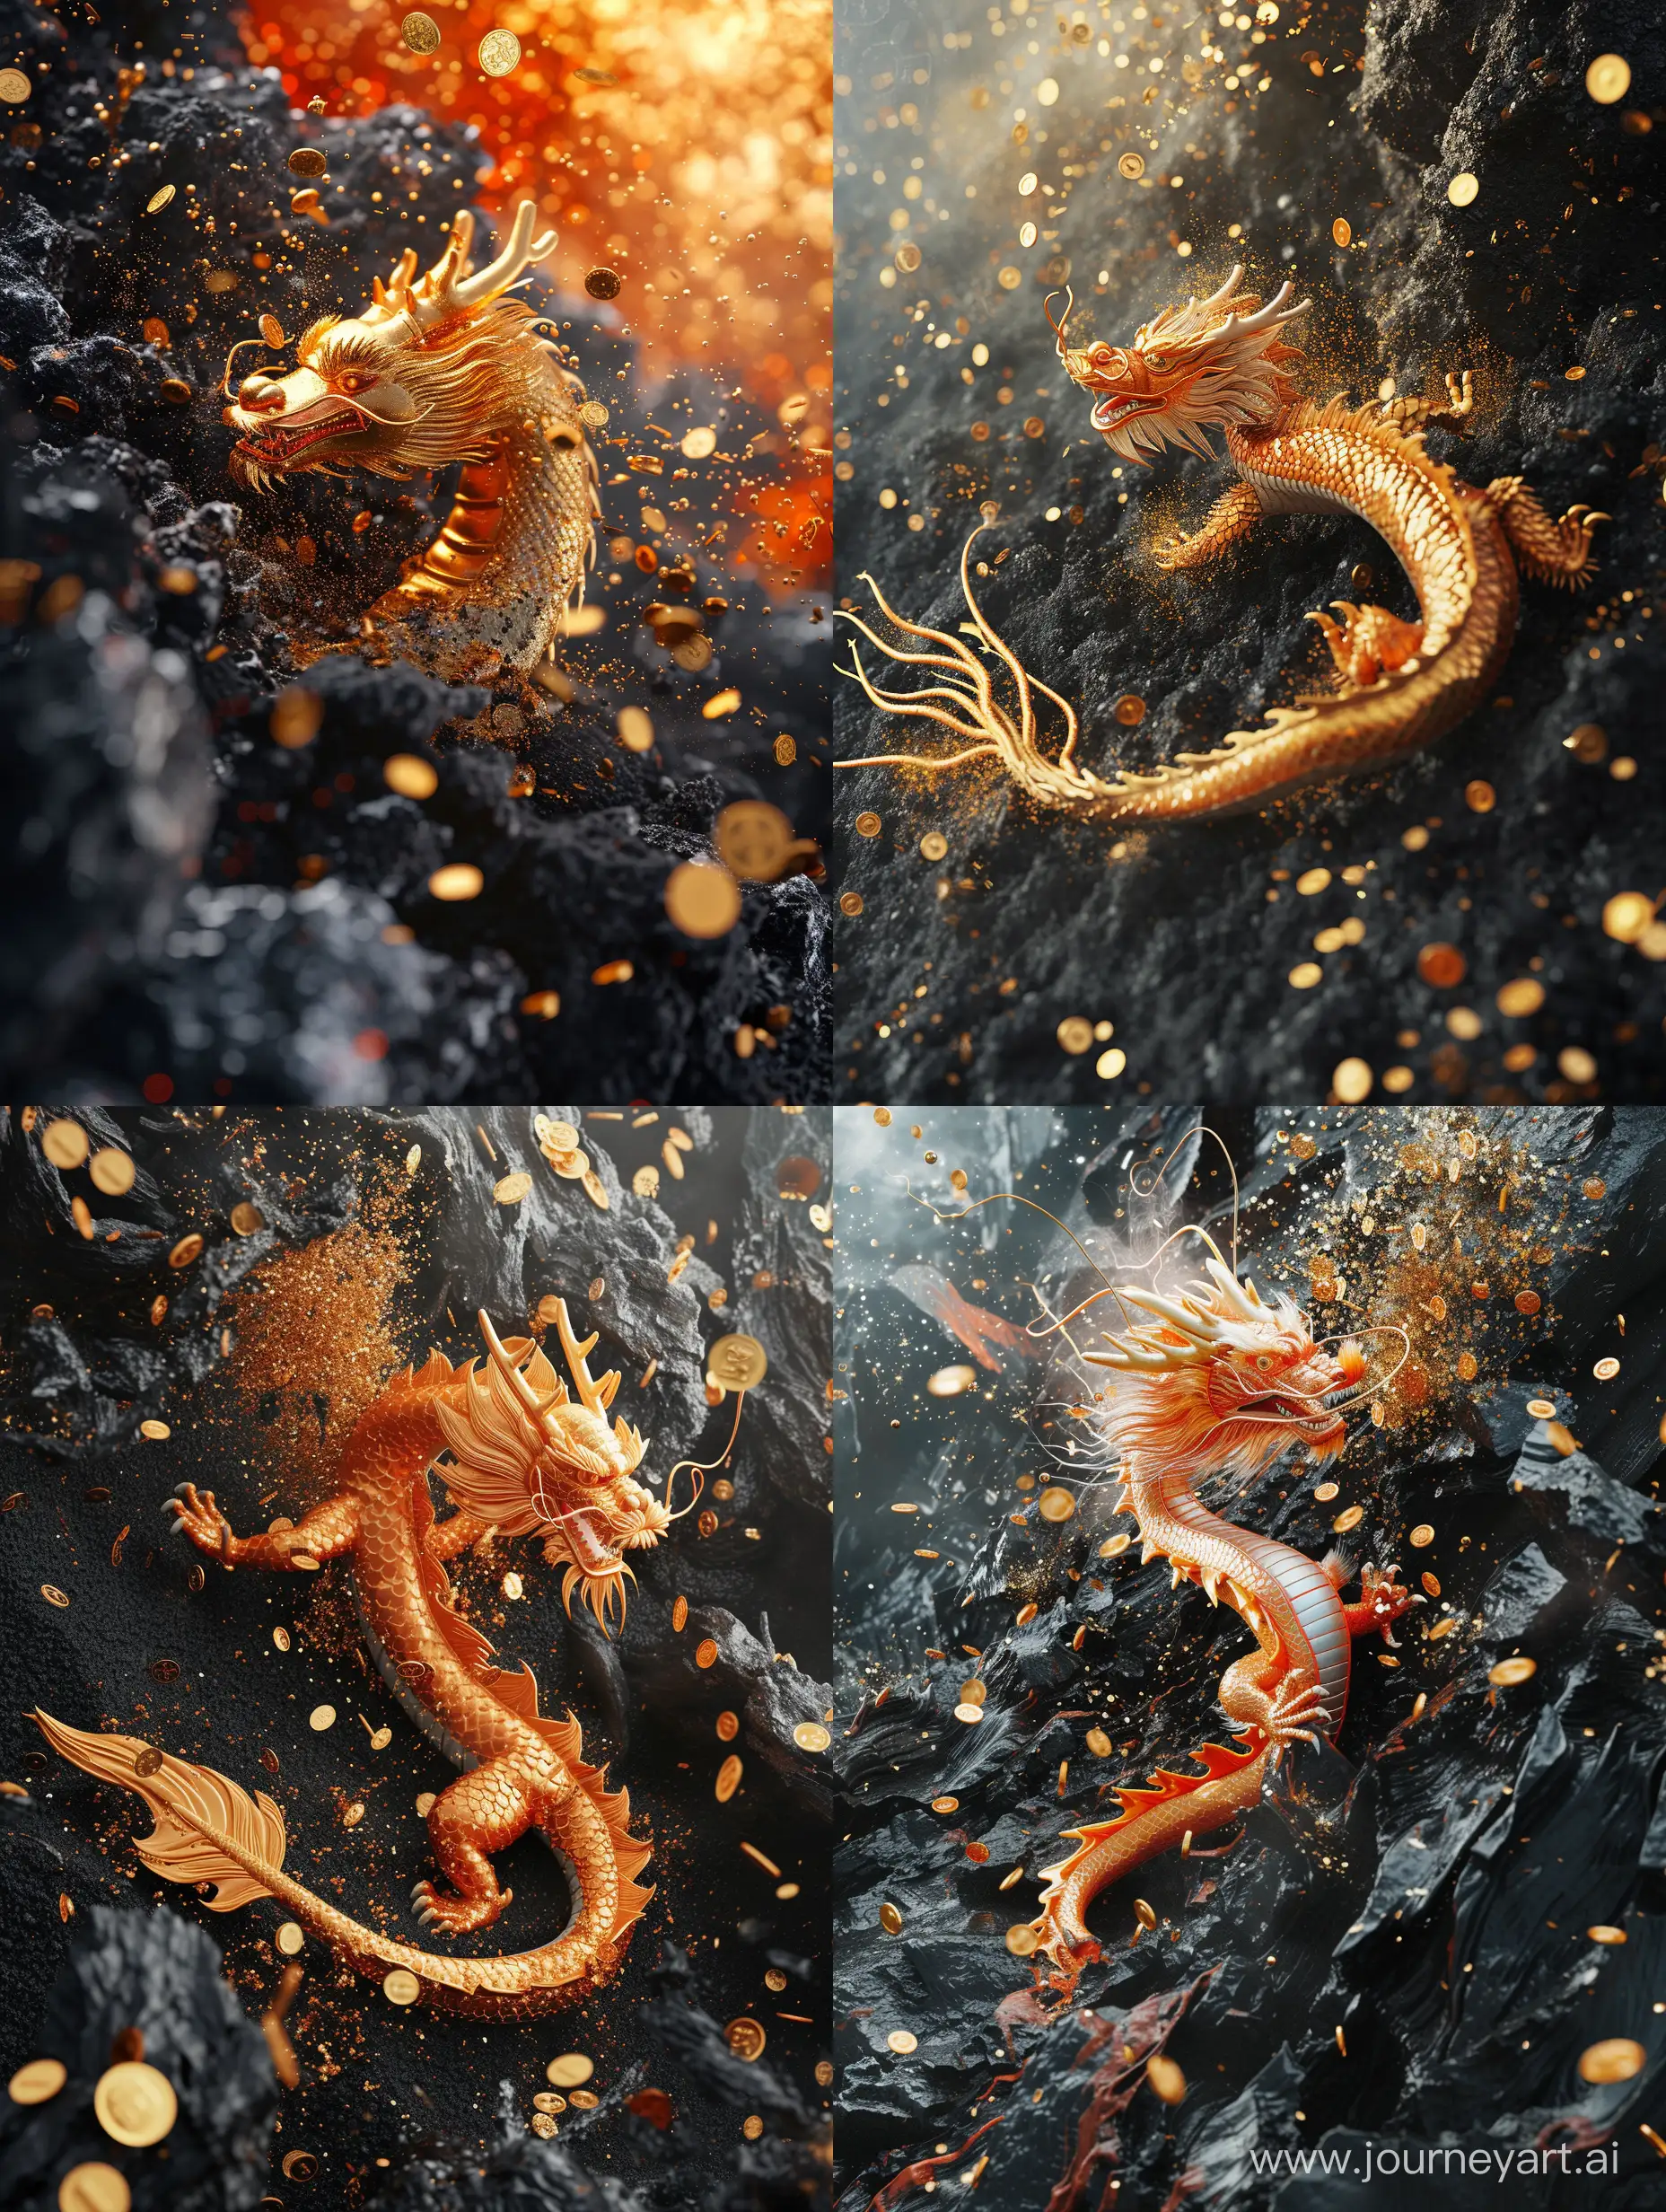 Chinese-Golden-Dragon-Emerges-from-Coal-Mine-with-Sprinkled-Gold-Coins